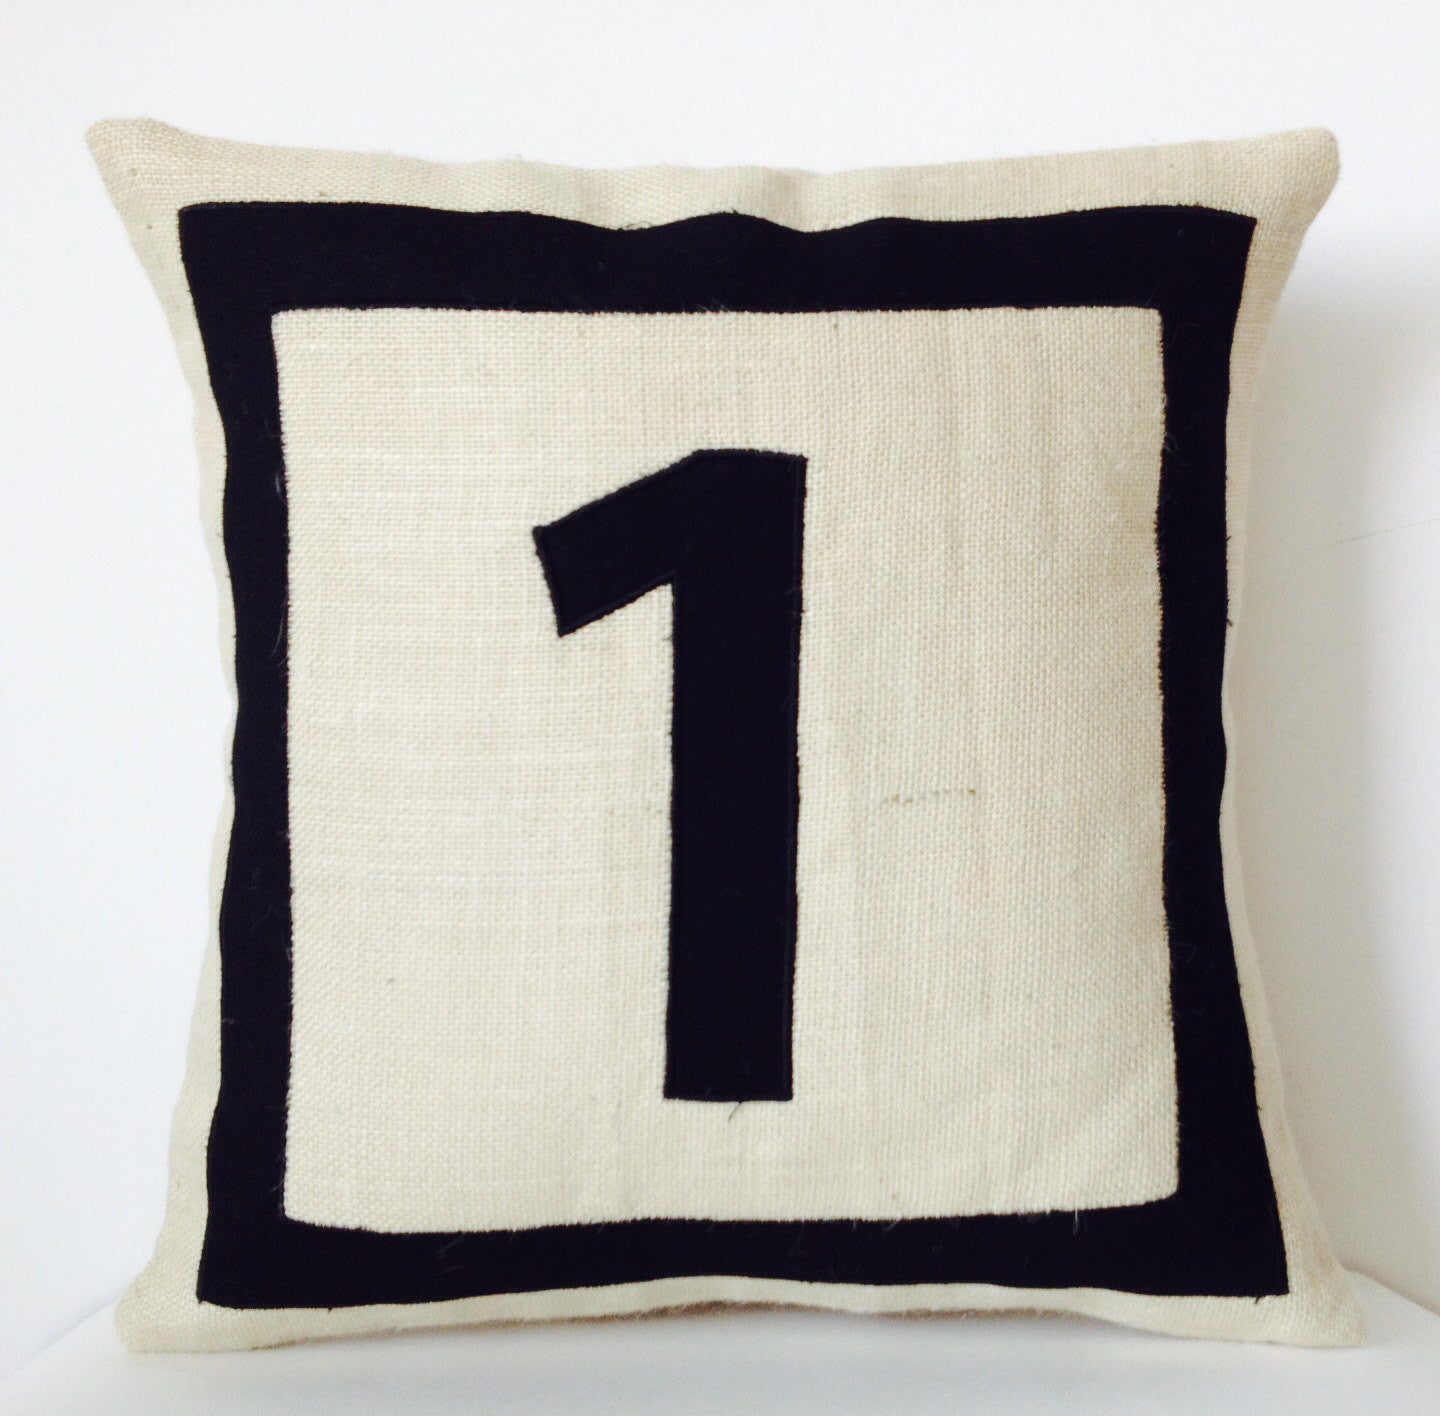 Handmade burlap throw pillow and cushion covers with personalized monogram in black